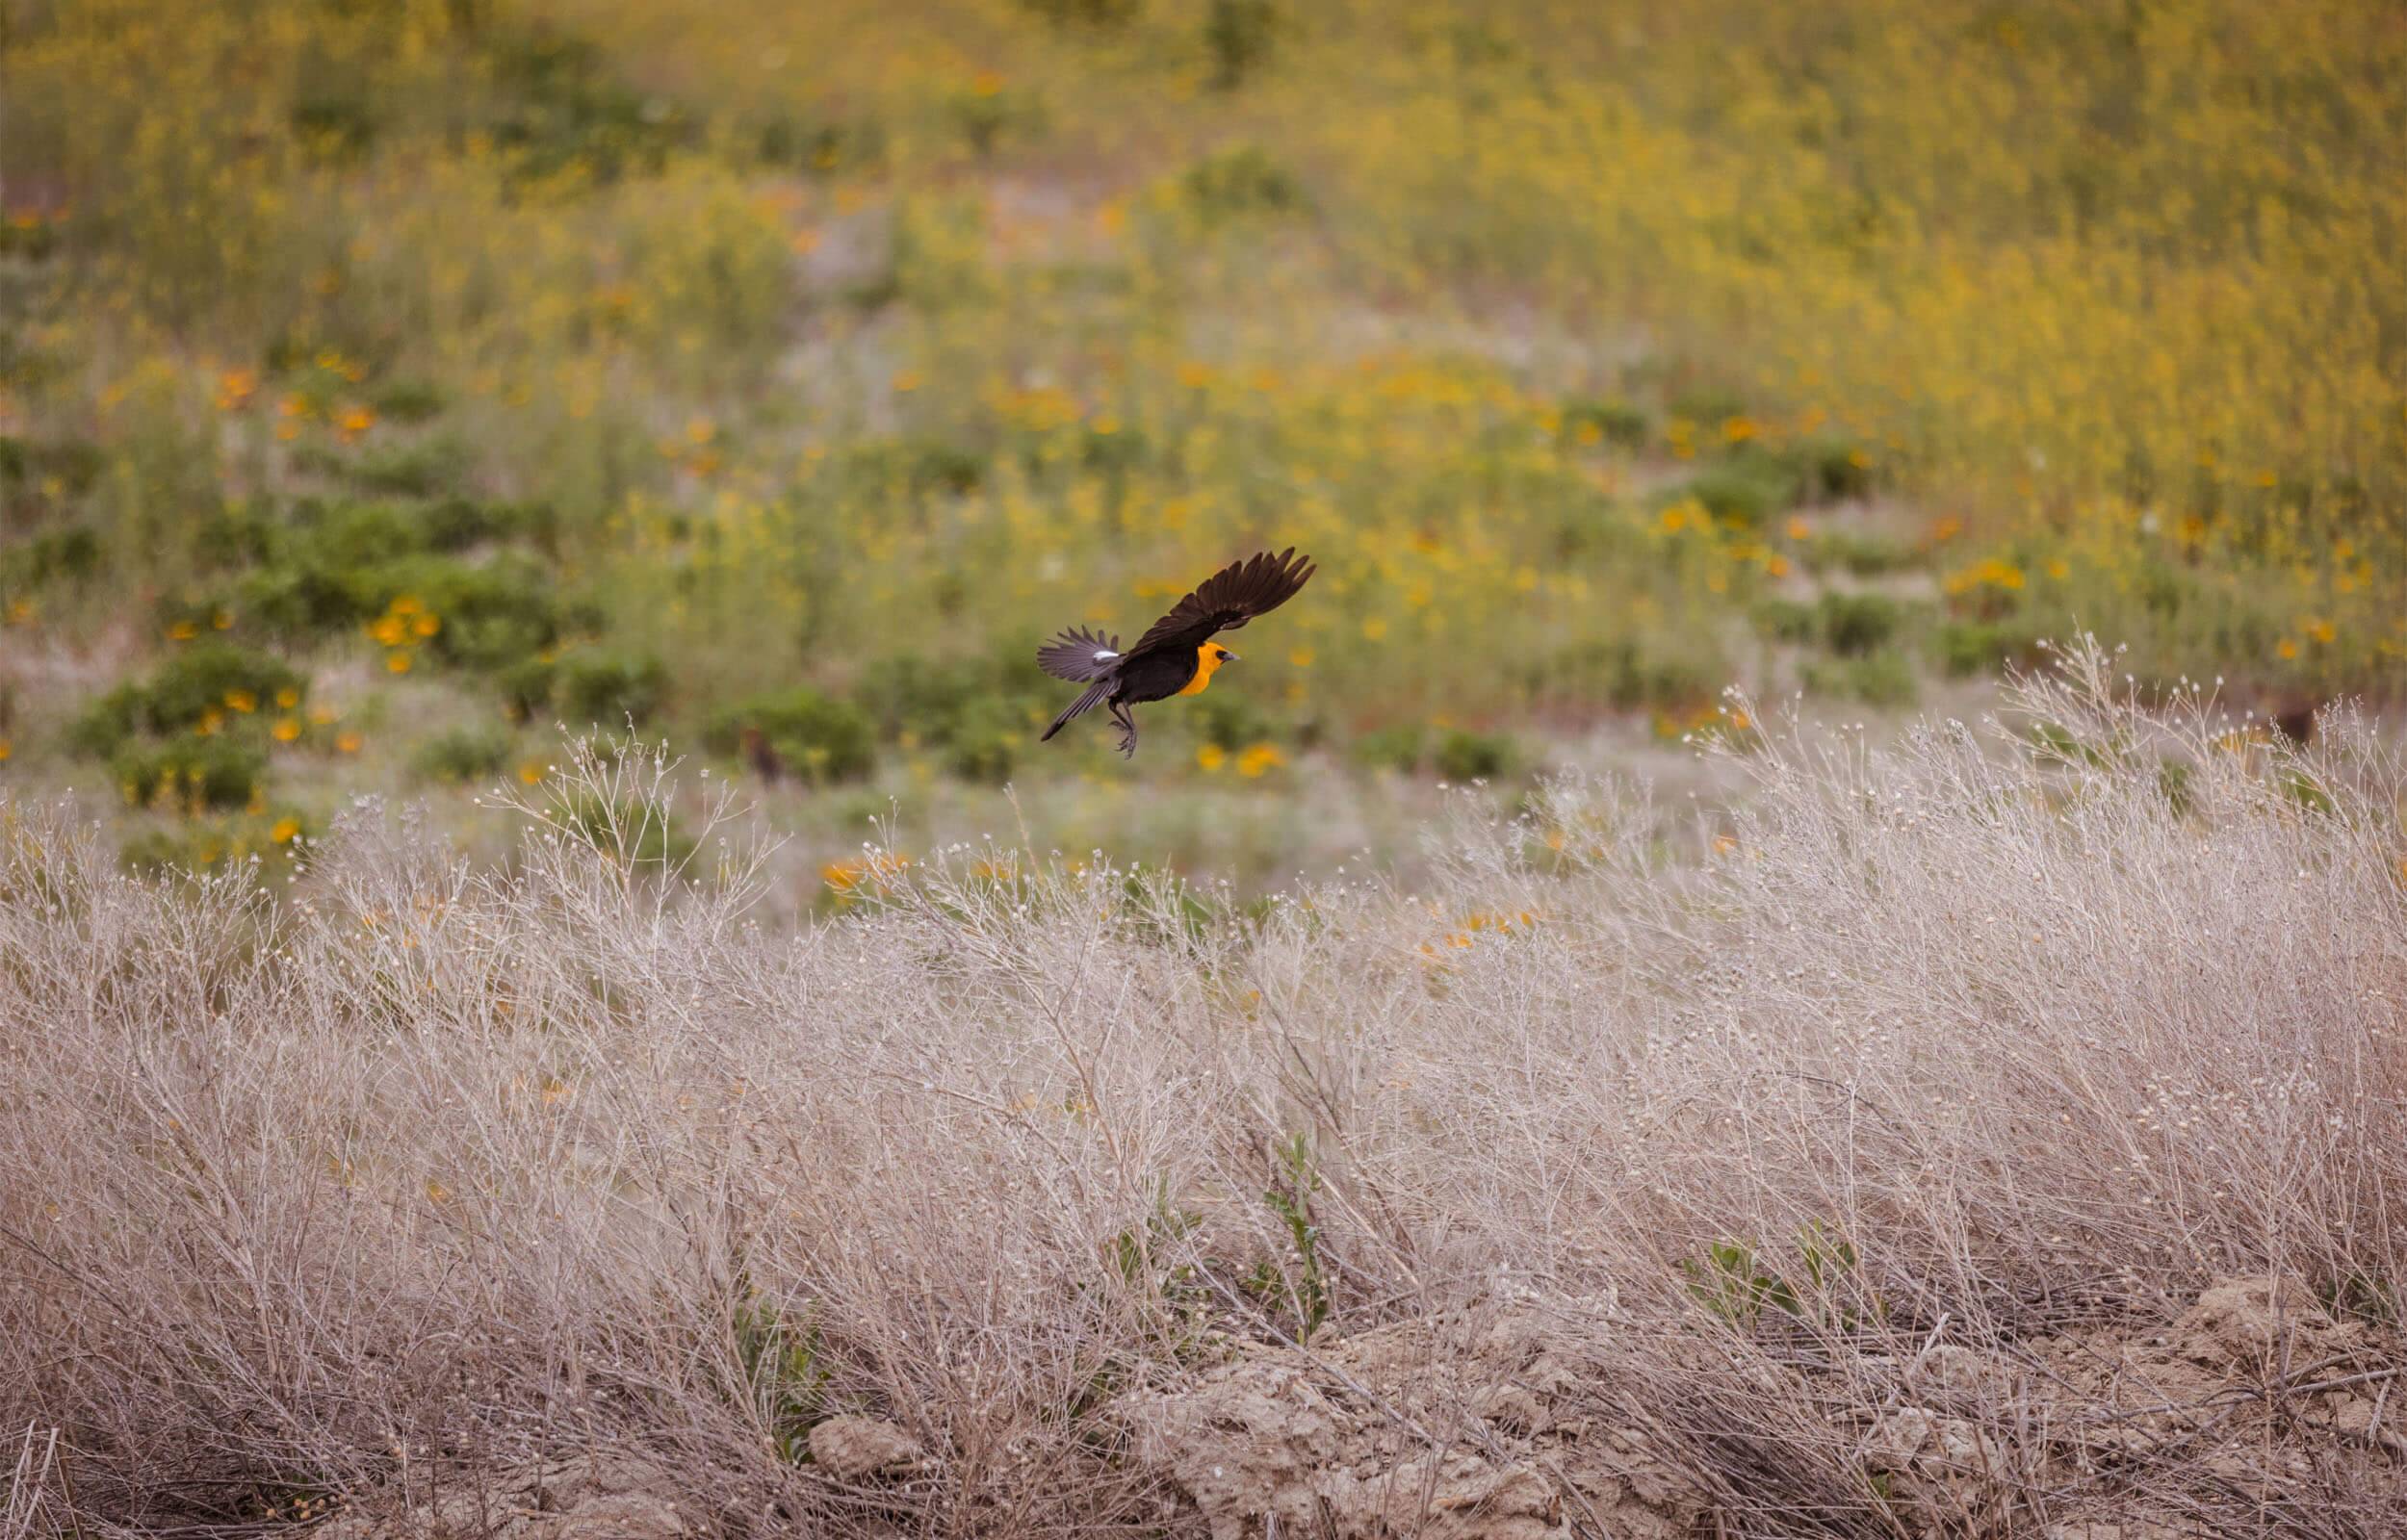 A bird with black wings and an orange head and breast, flying low over field dotted with orange flowers at Mud Lake.